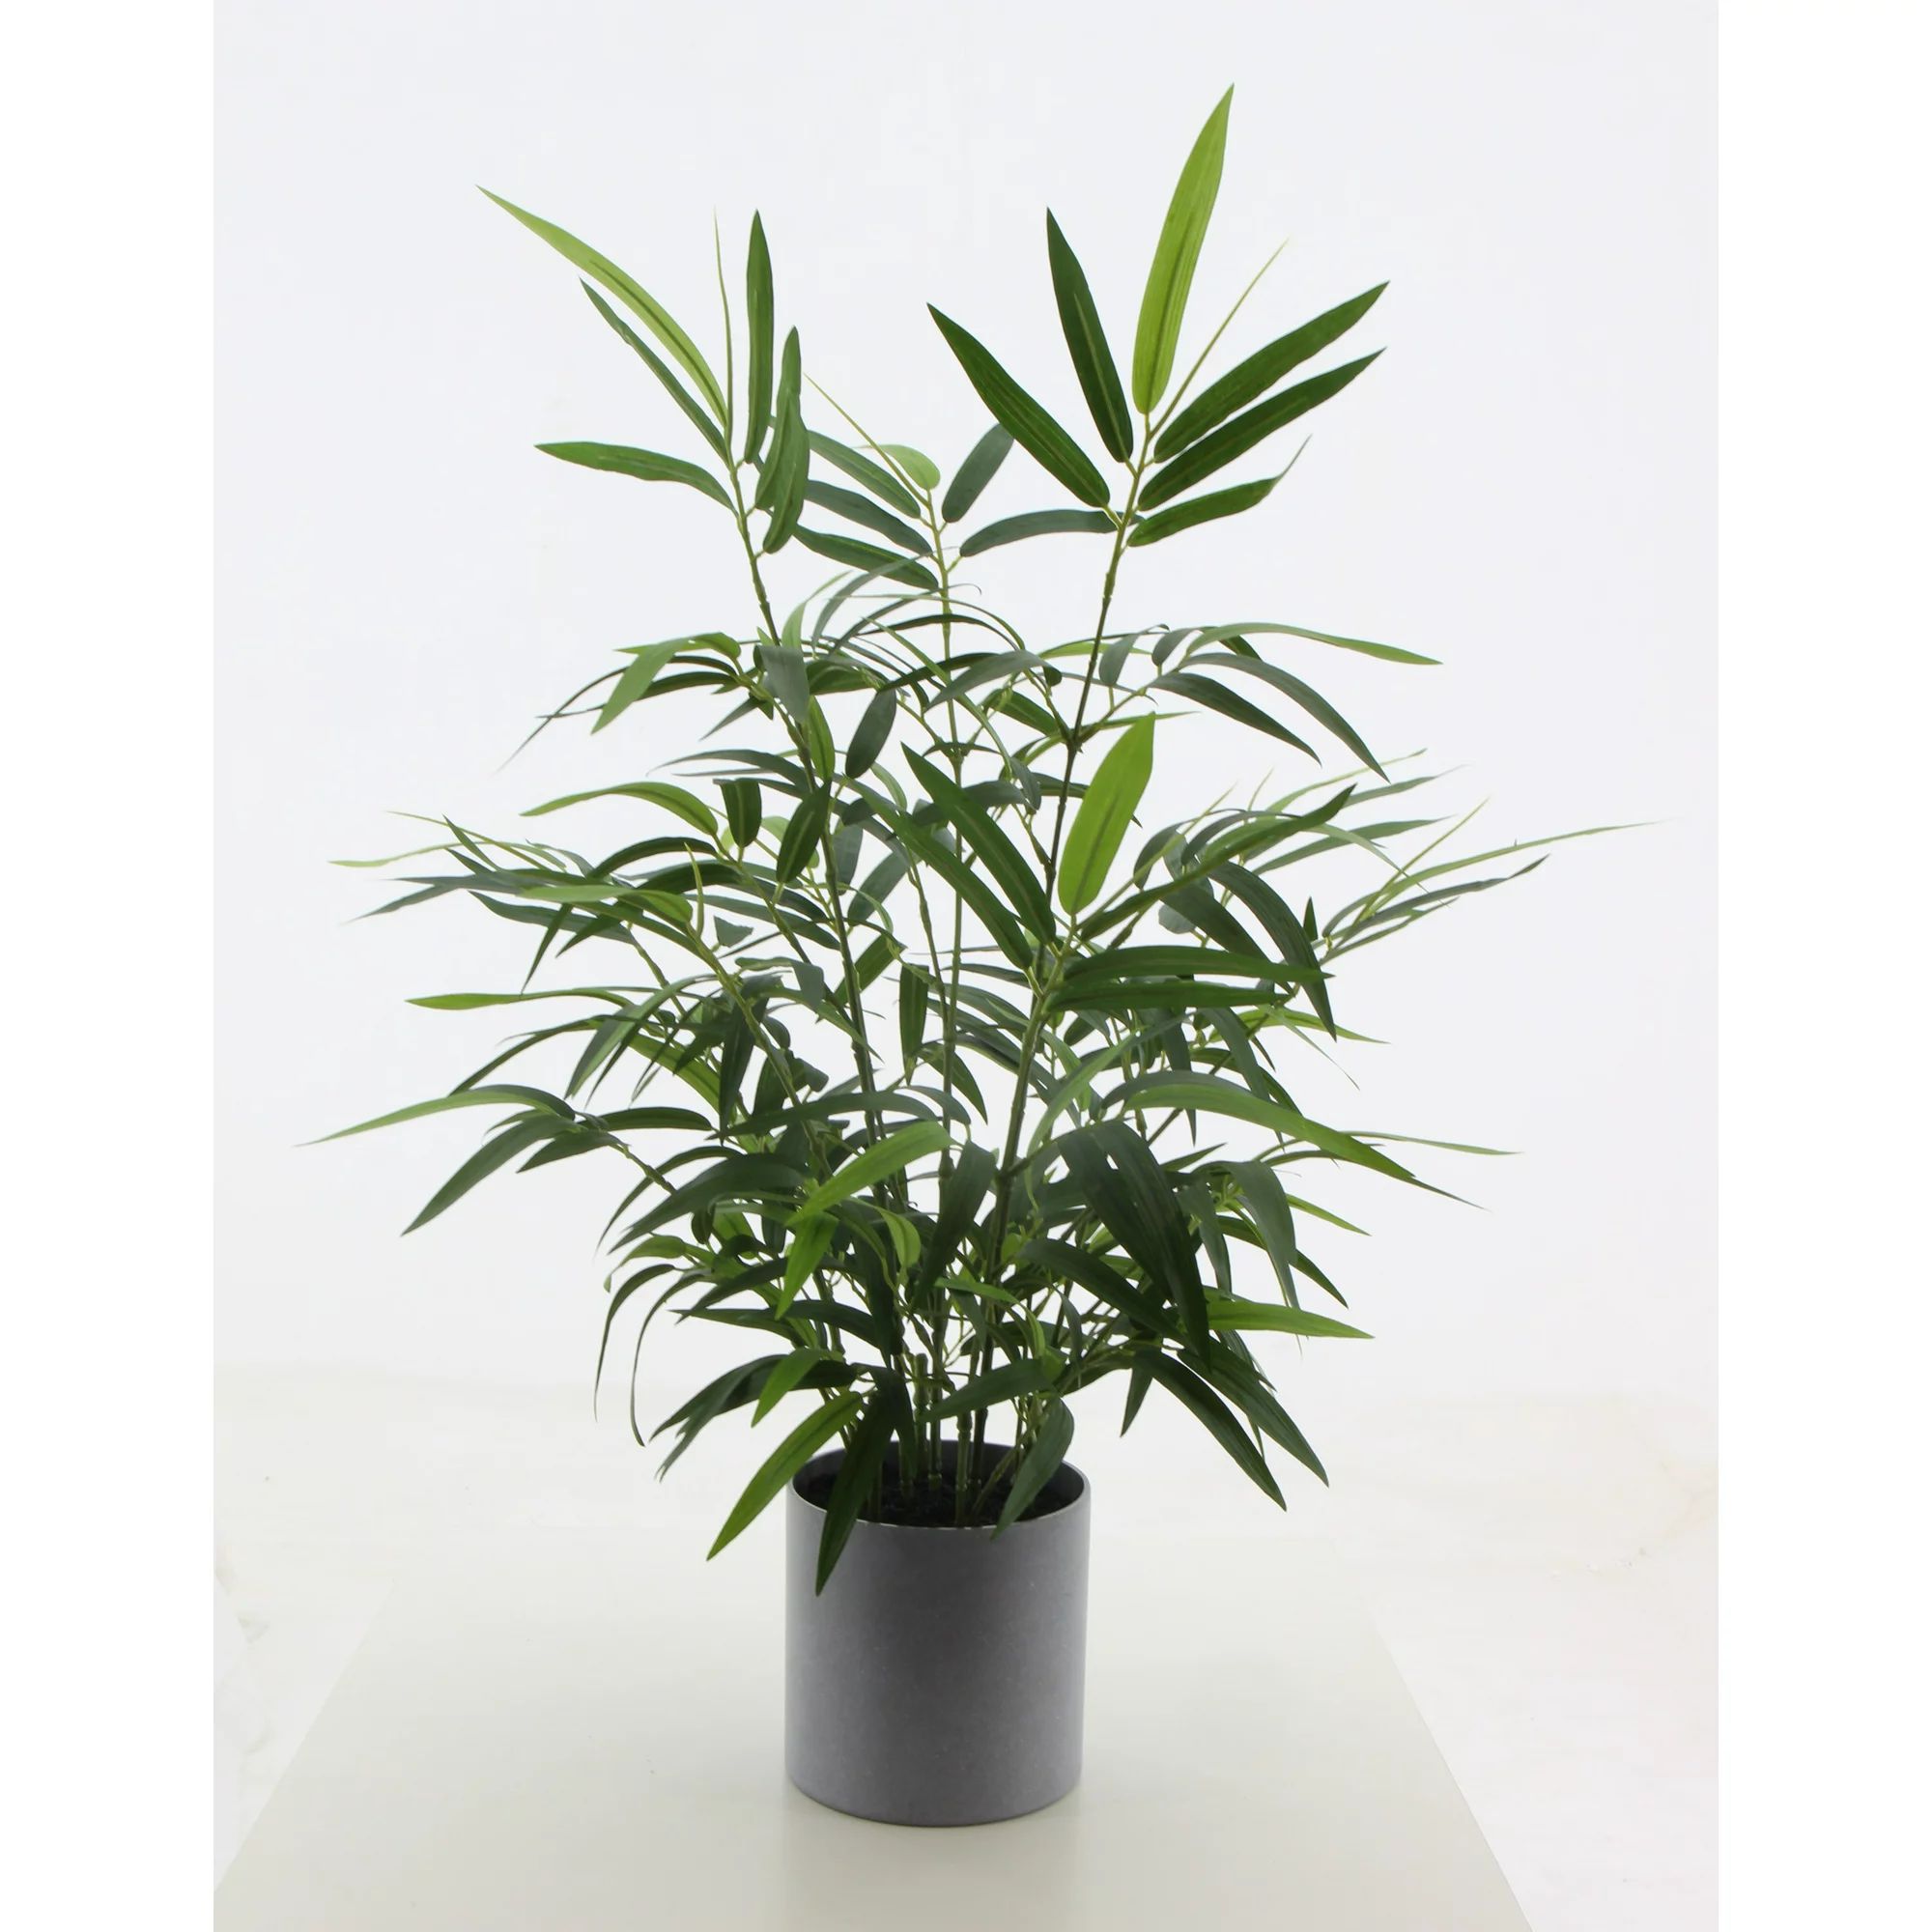 Mainstays 30" Tall Artficial Potted Green Bamboo Plant in Black Pot | Walmart (US)